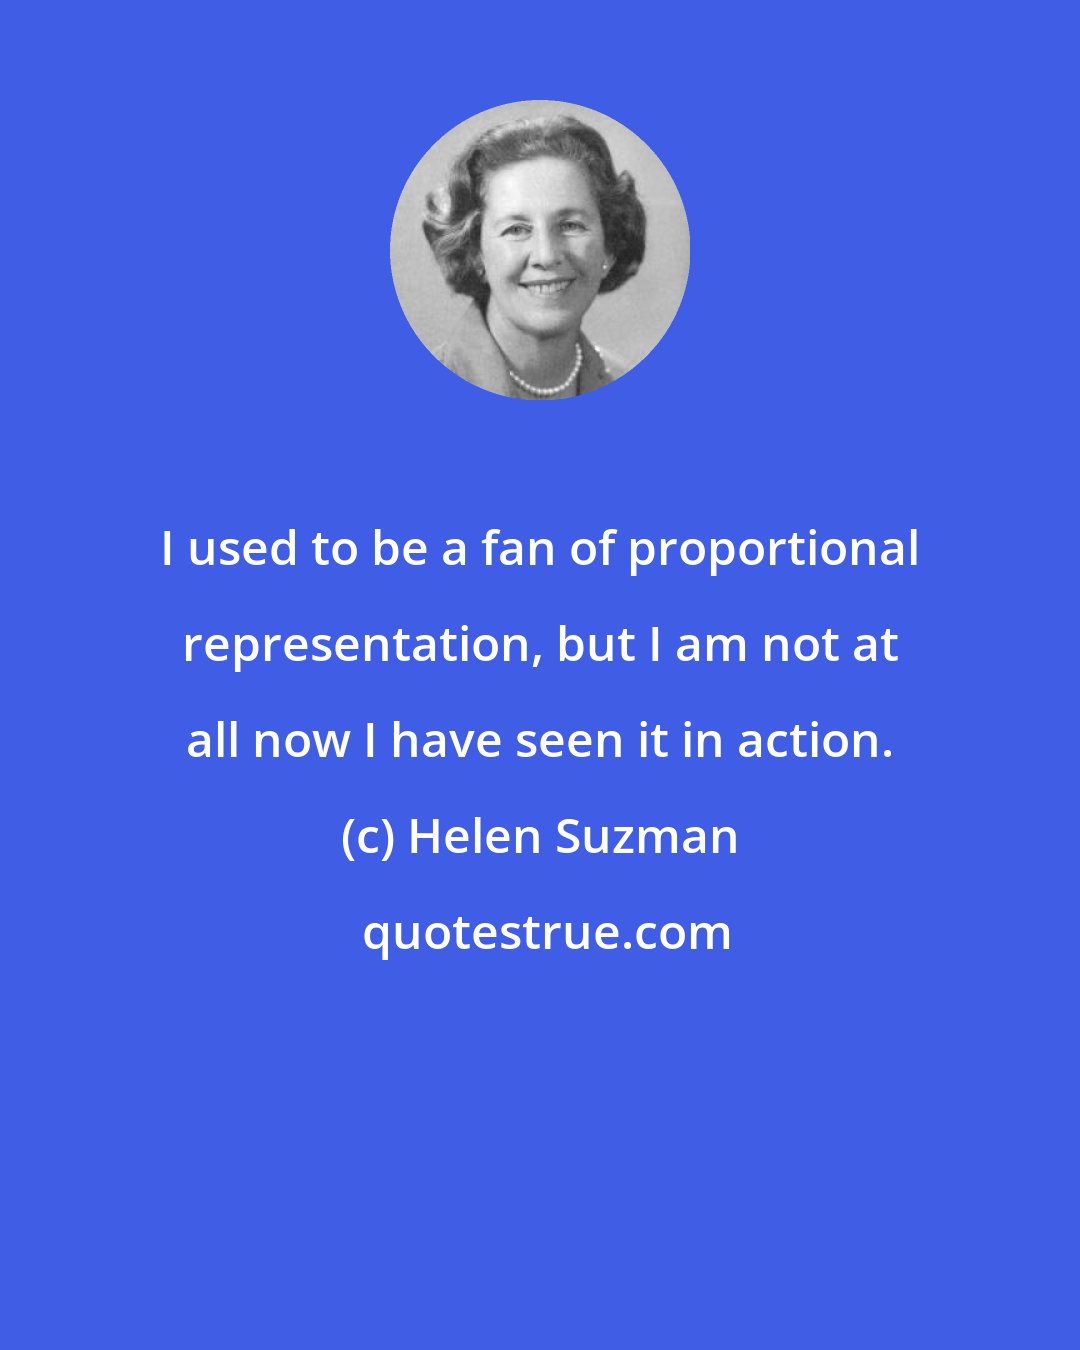 Helen Suzman: I used to be a fan of proportional representation, but I am not at all now I have seen it in action.